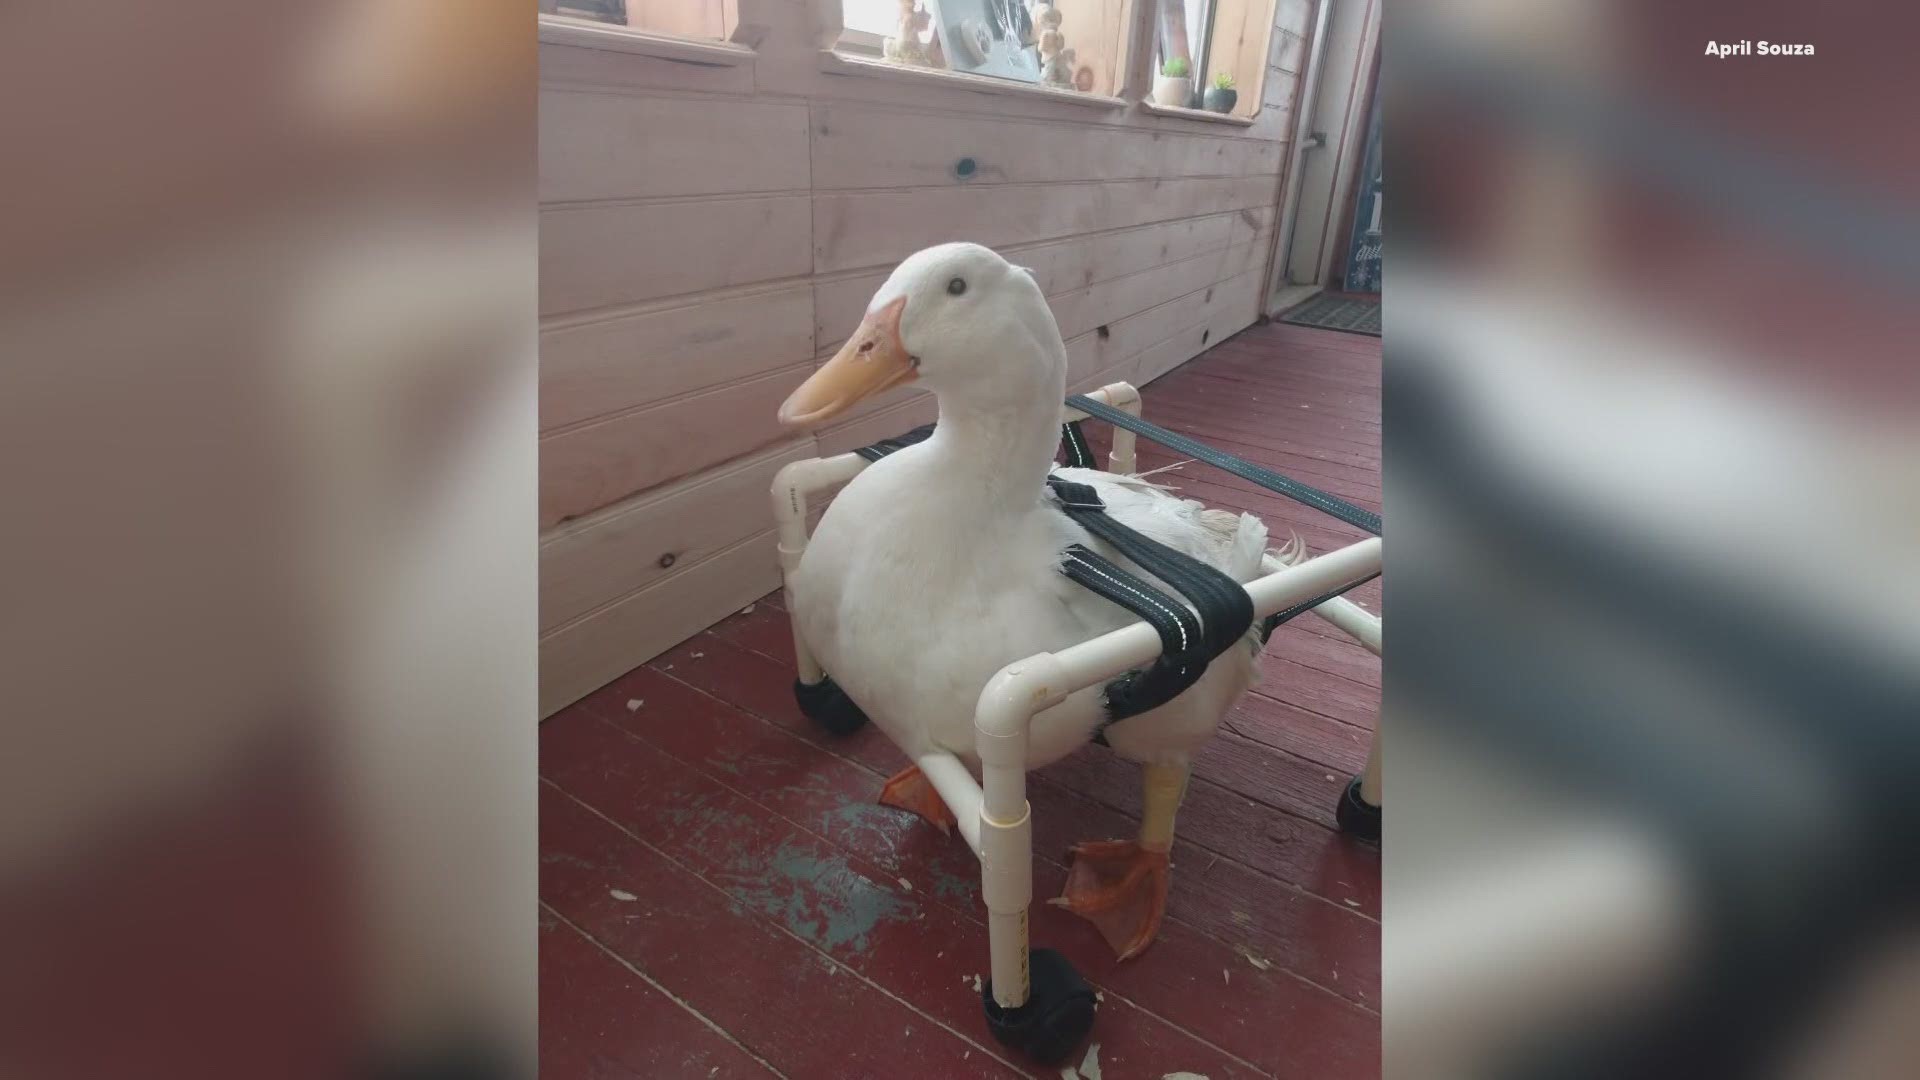 Ry the duck was born with a condition causing him to struggle to hold up his head. His owner came up with an innovative solution to get him back on his feet.